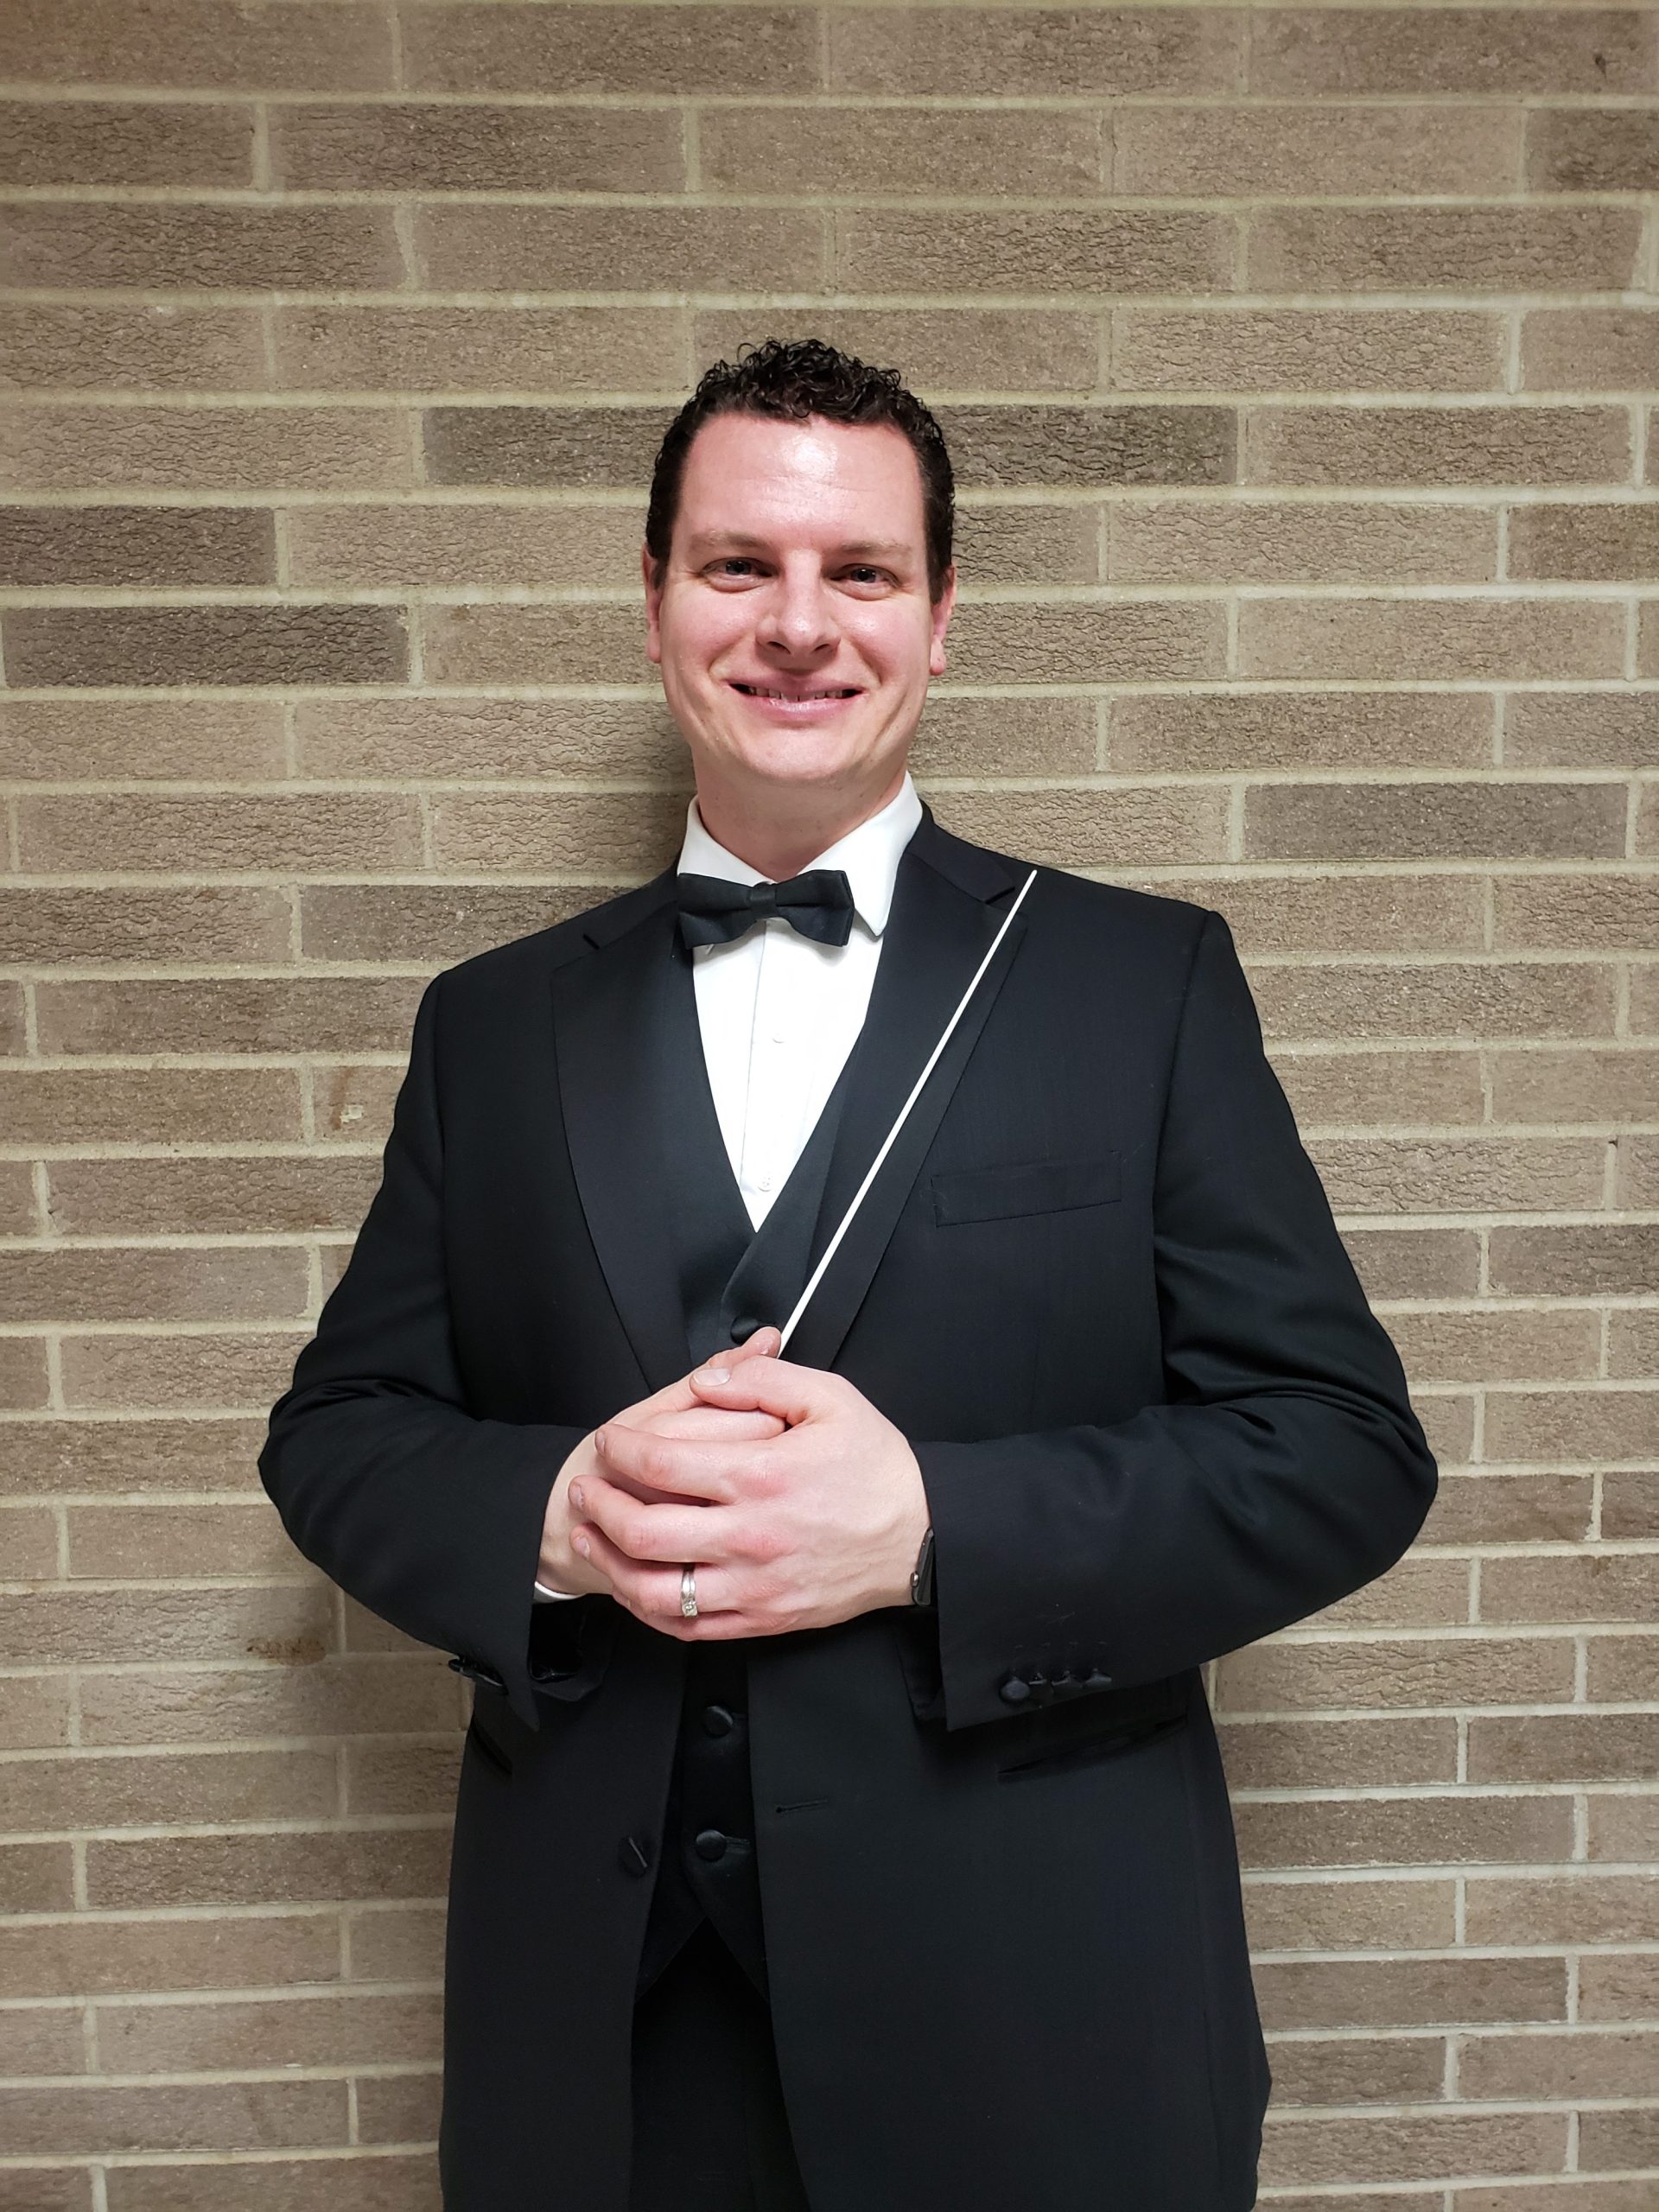 Chris Anderson, Conductor of the FSWE